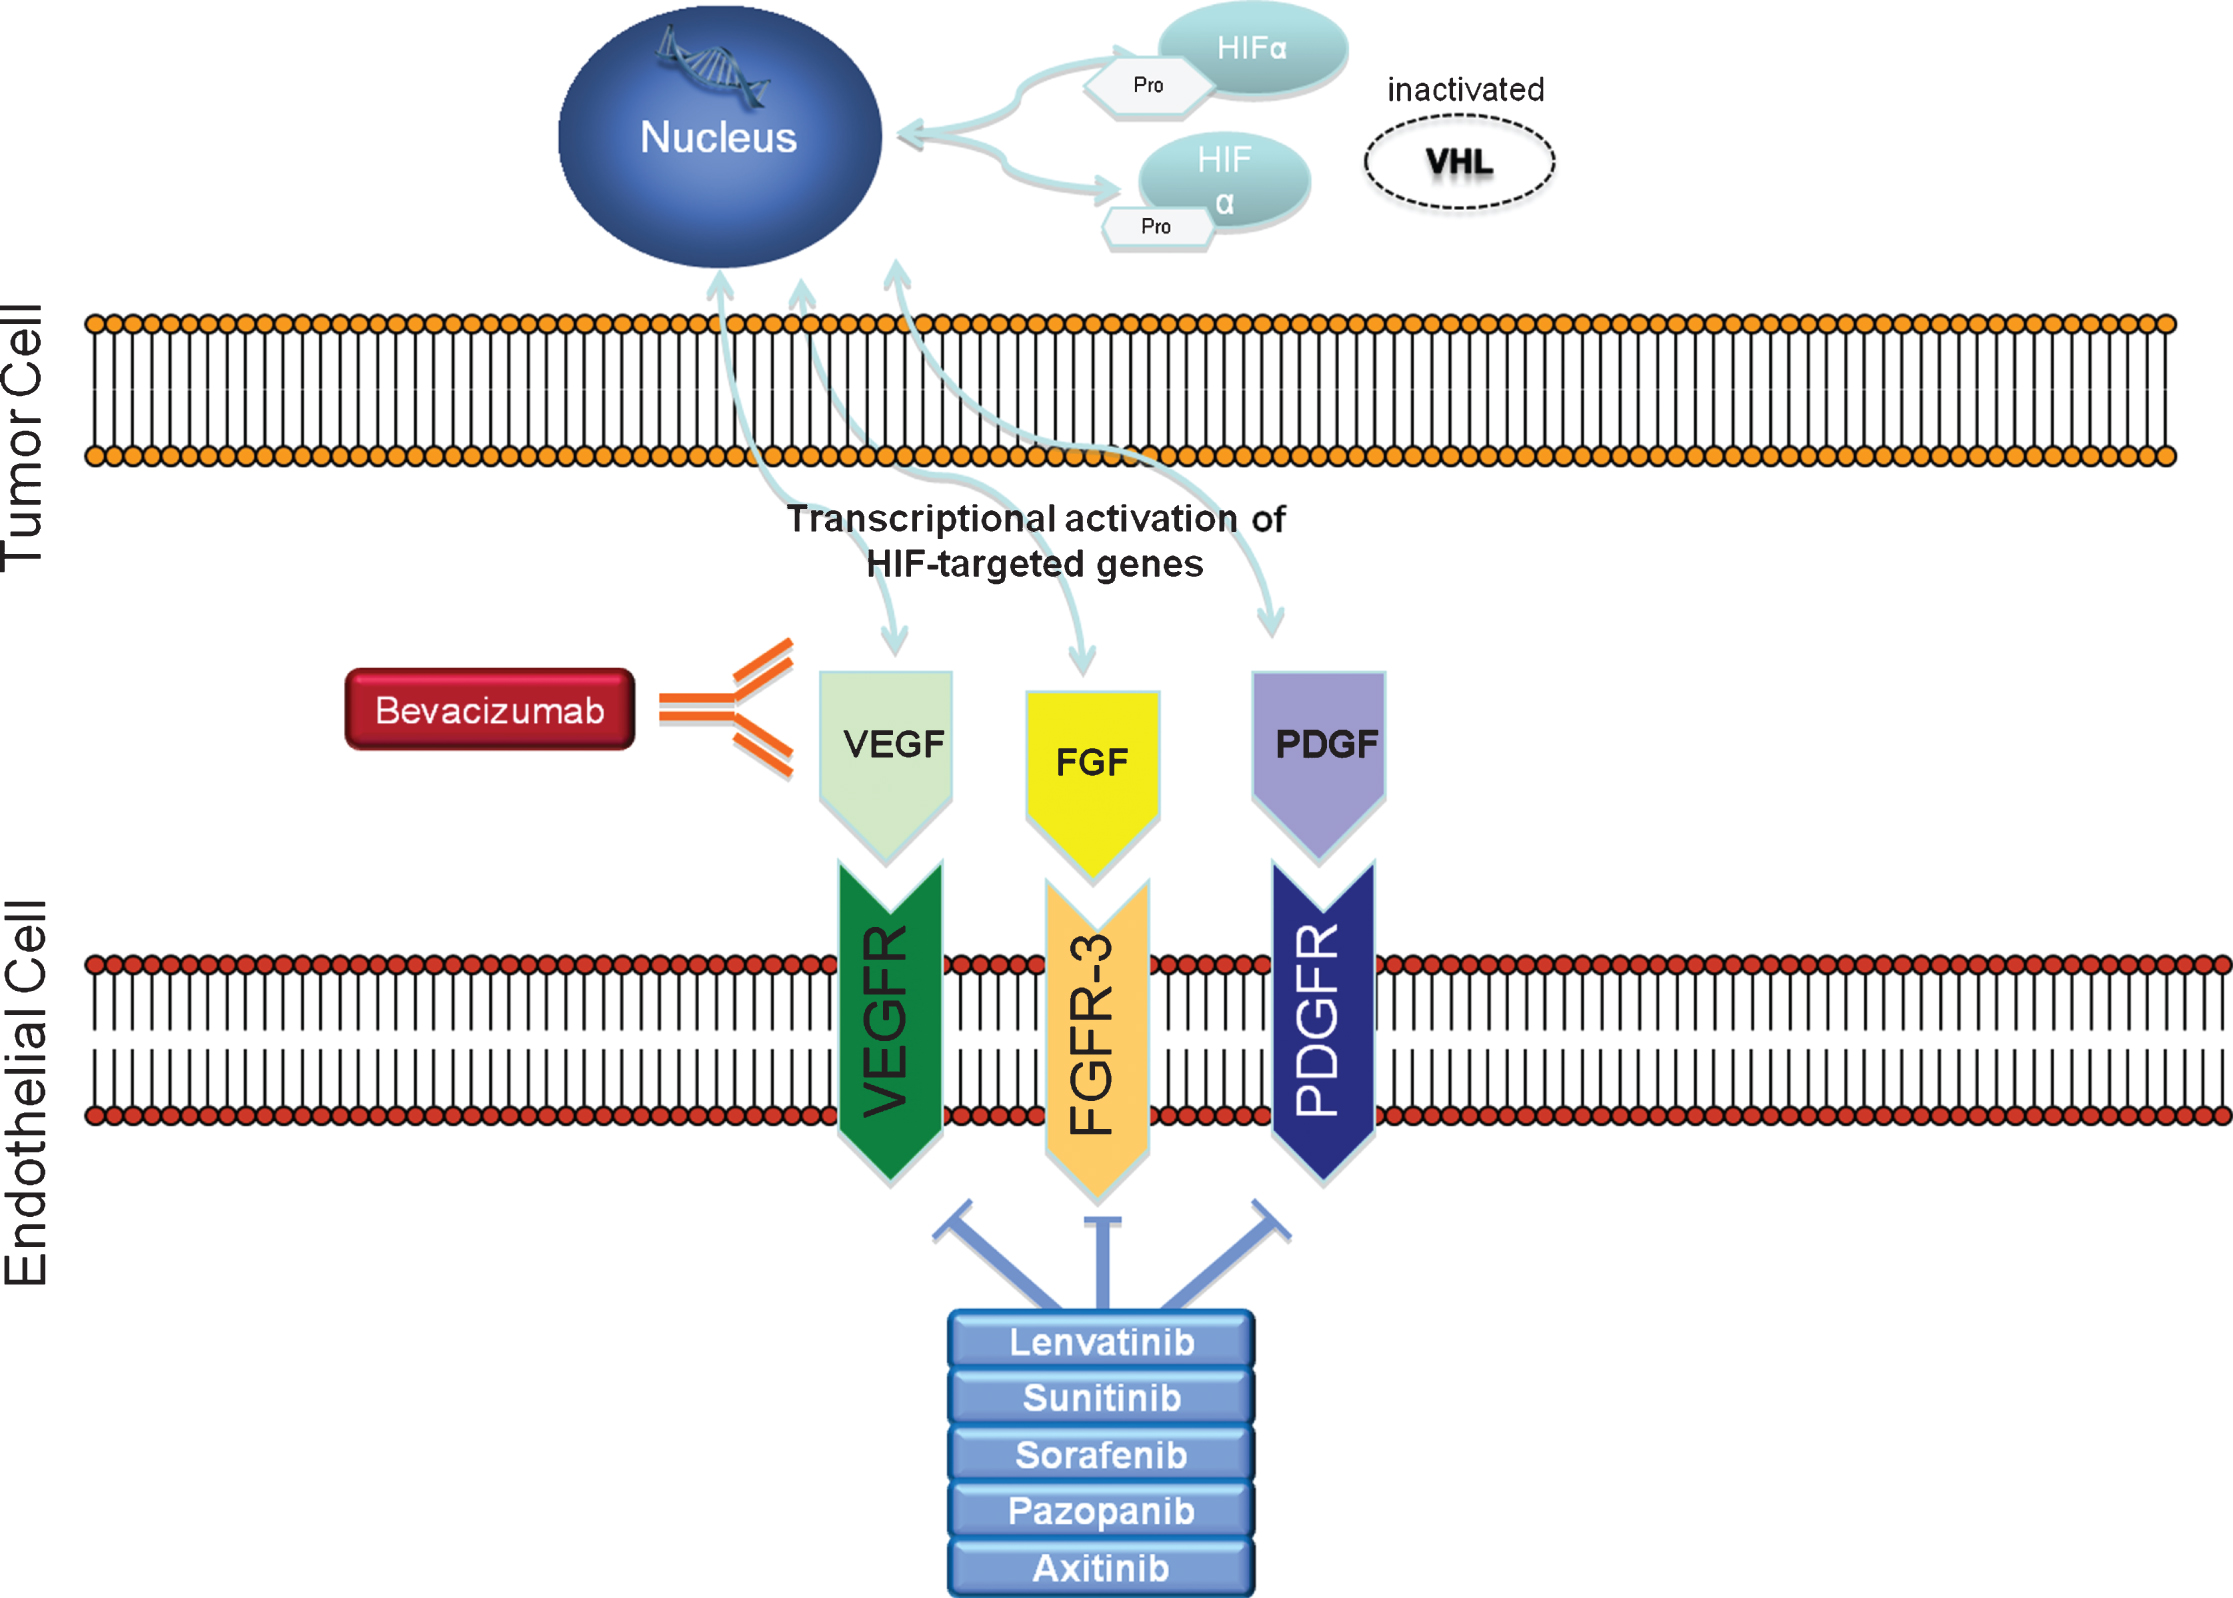 Renal cell carcinoma‘s disease biology: inactivated VHL gene leads to overexpression of HIF. Genes activated by HIF transcript growth factors such as VEGF, PDGF and FGF.